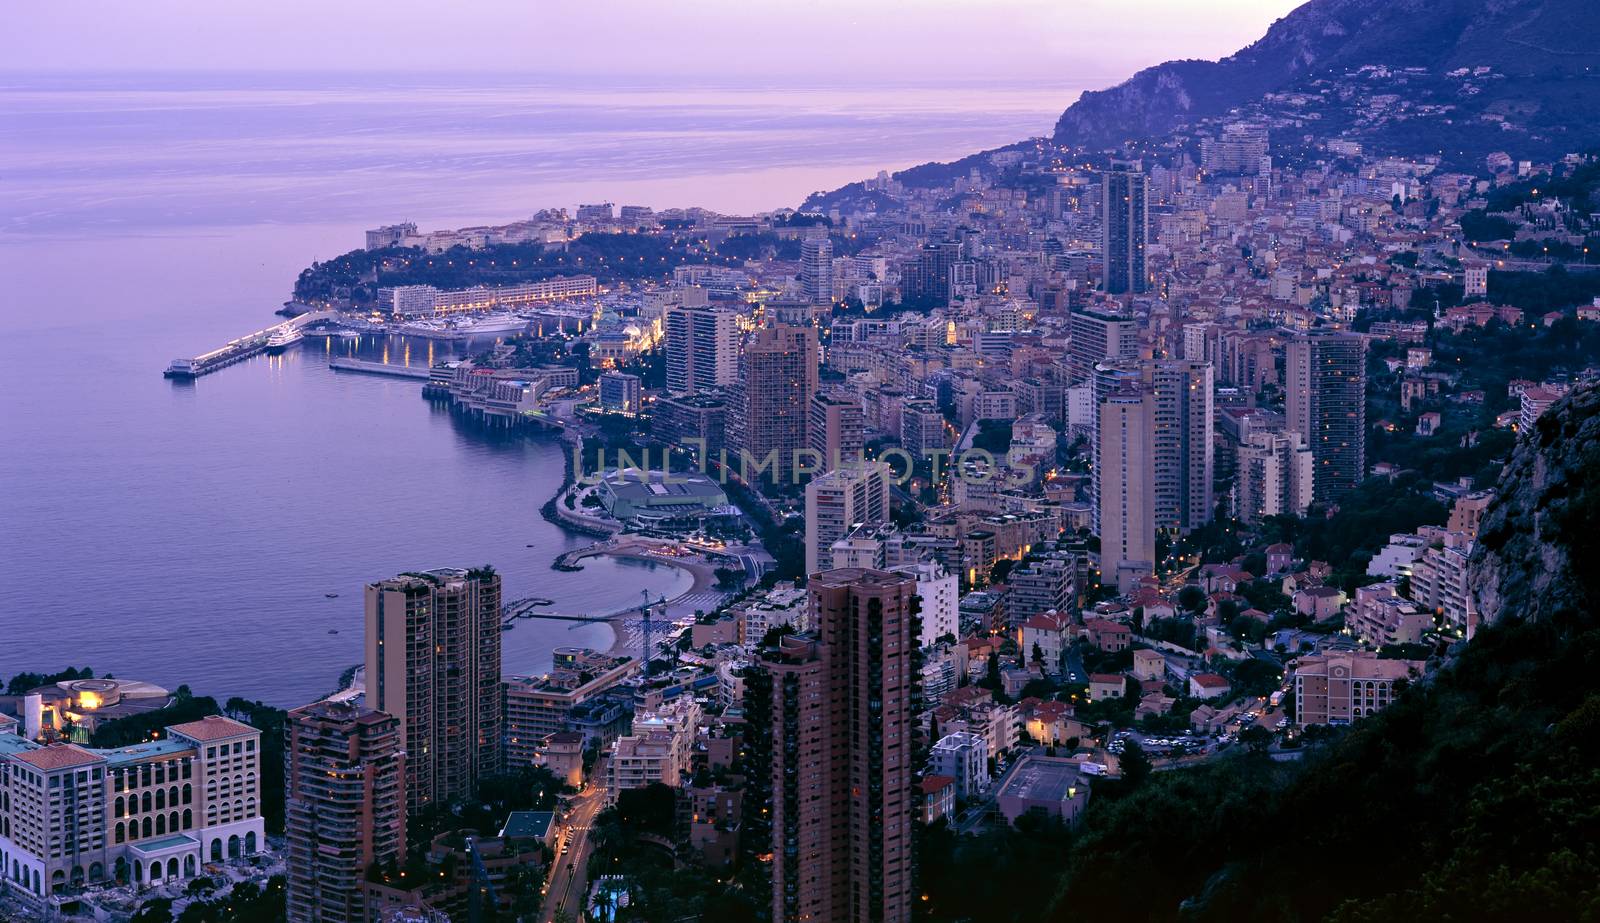 Horizontal cityscape panorama on the Monaco in the dawn, shot with medium format camera.